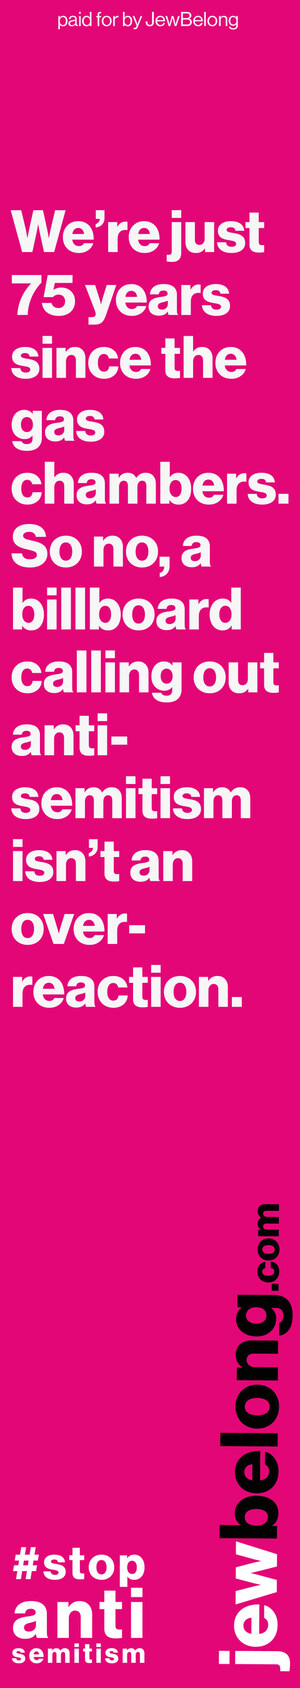 JewBelong or JewBeGone" Multi-Media Campaign Against Antisemitism Expands in Response to the Rapid Rise in Jewish Hate